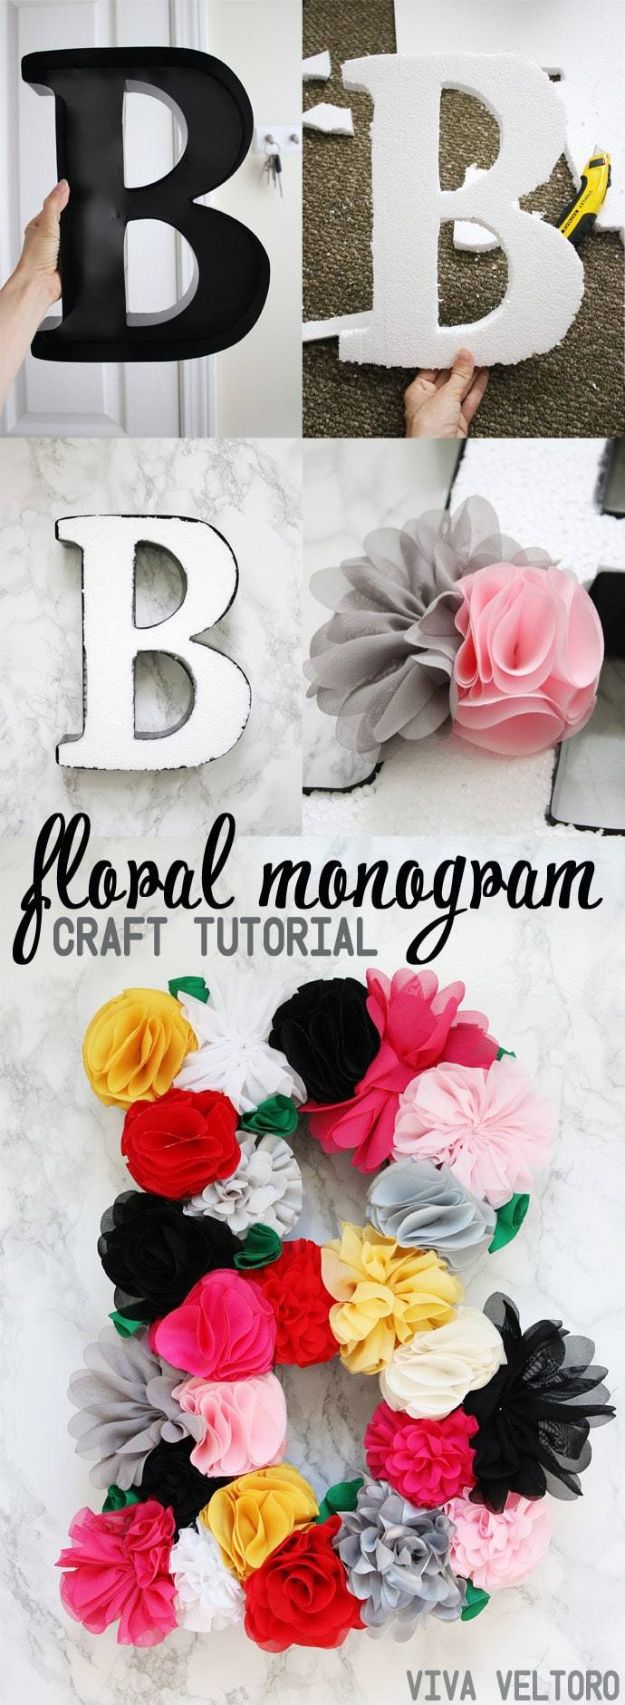 Crafts To Make and Sell - Flower Letter Monogram - 75 MORE Easy DIY Ideas for Cheap Things To Sell on Etsy, Online and for Craft Fairs. Make Money with crafts to sell ideas #crafts